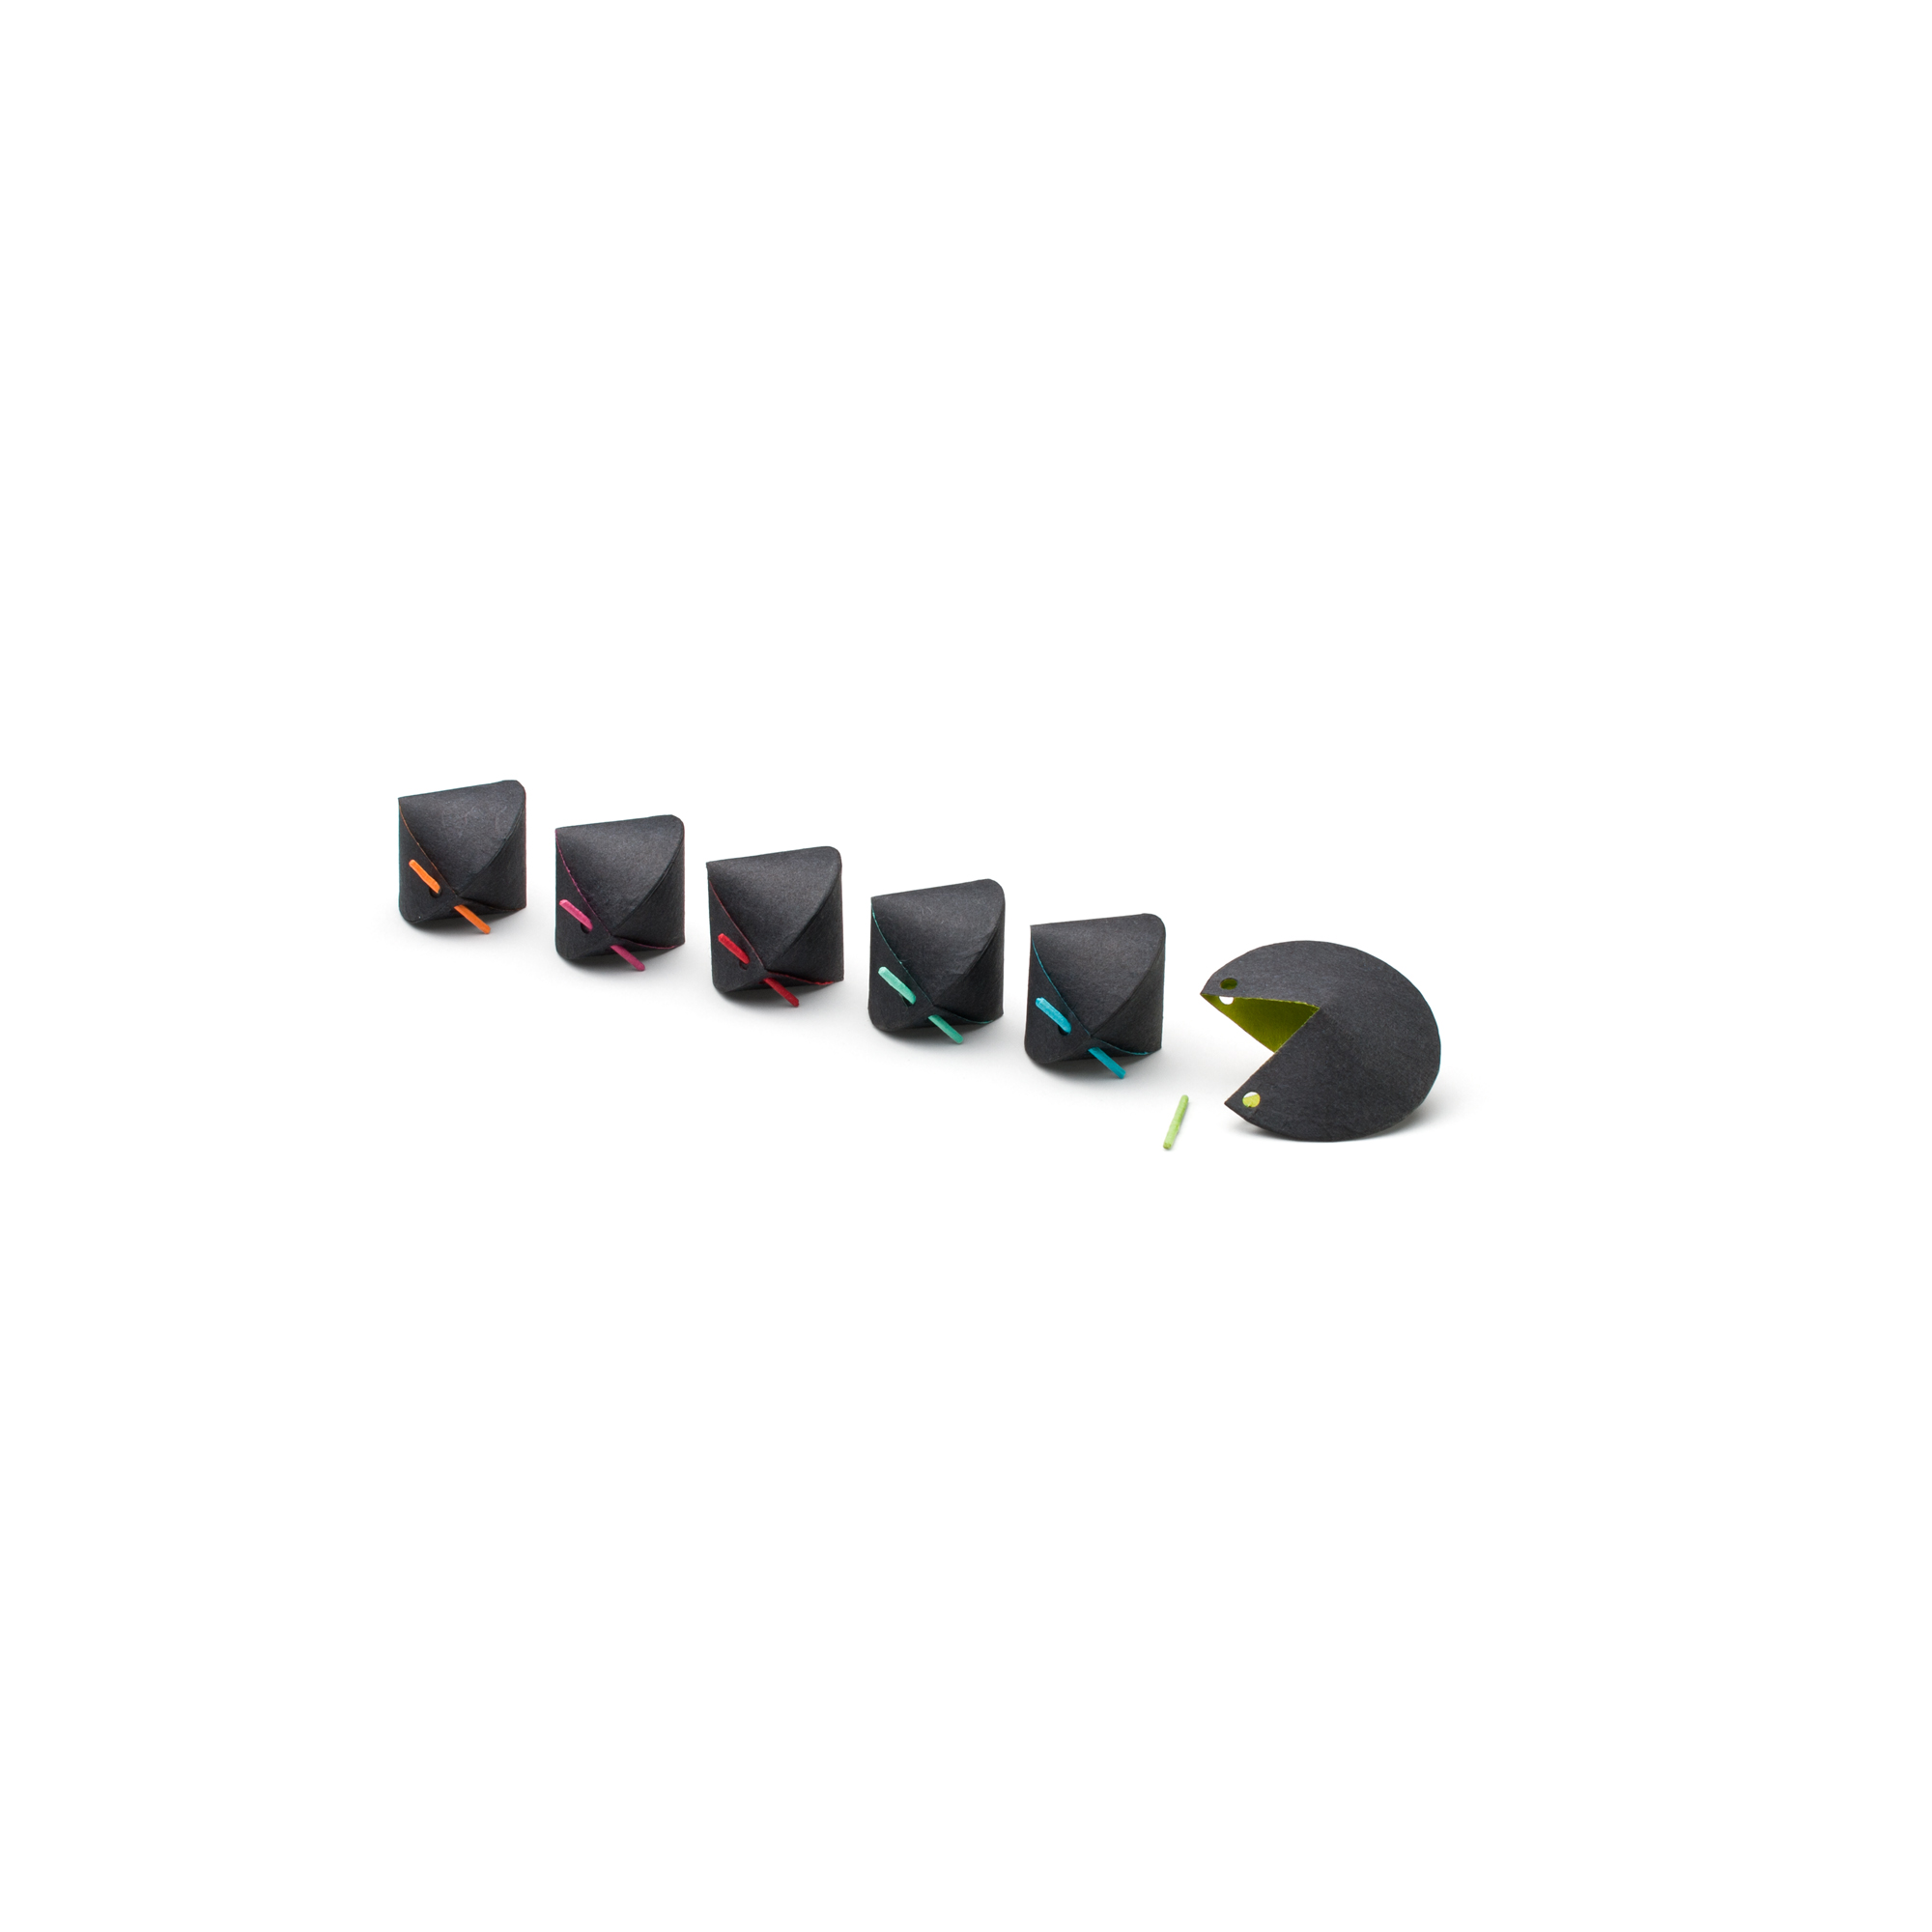 PACBOX small black-assorted colours